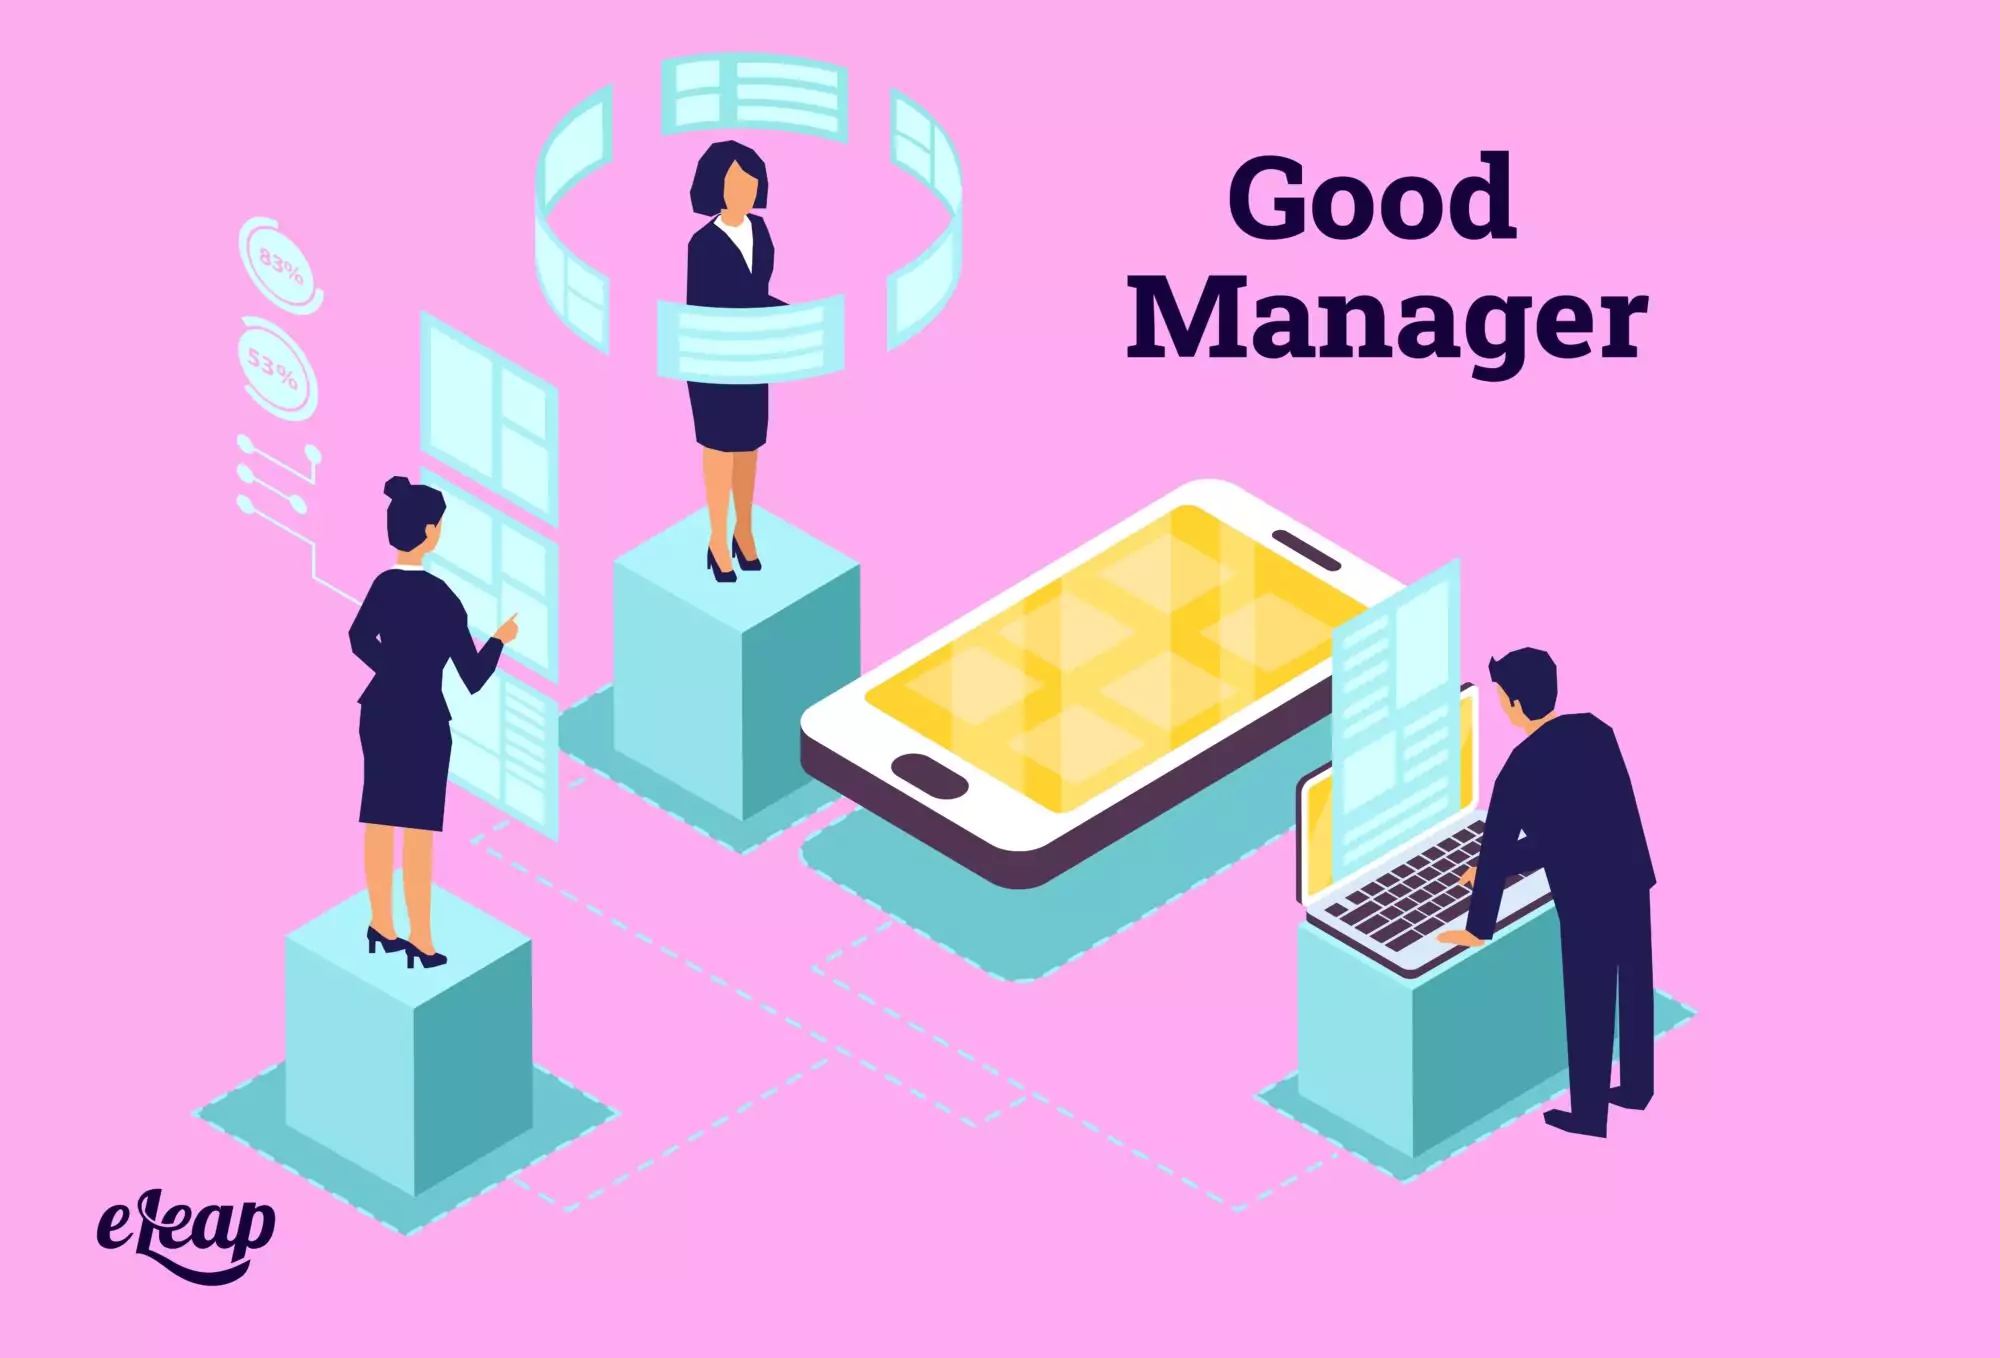 Good manager: Traits of a good manager